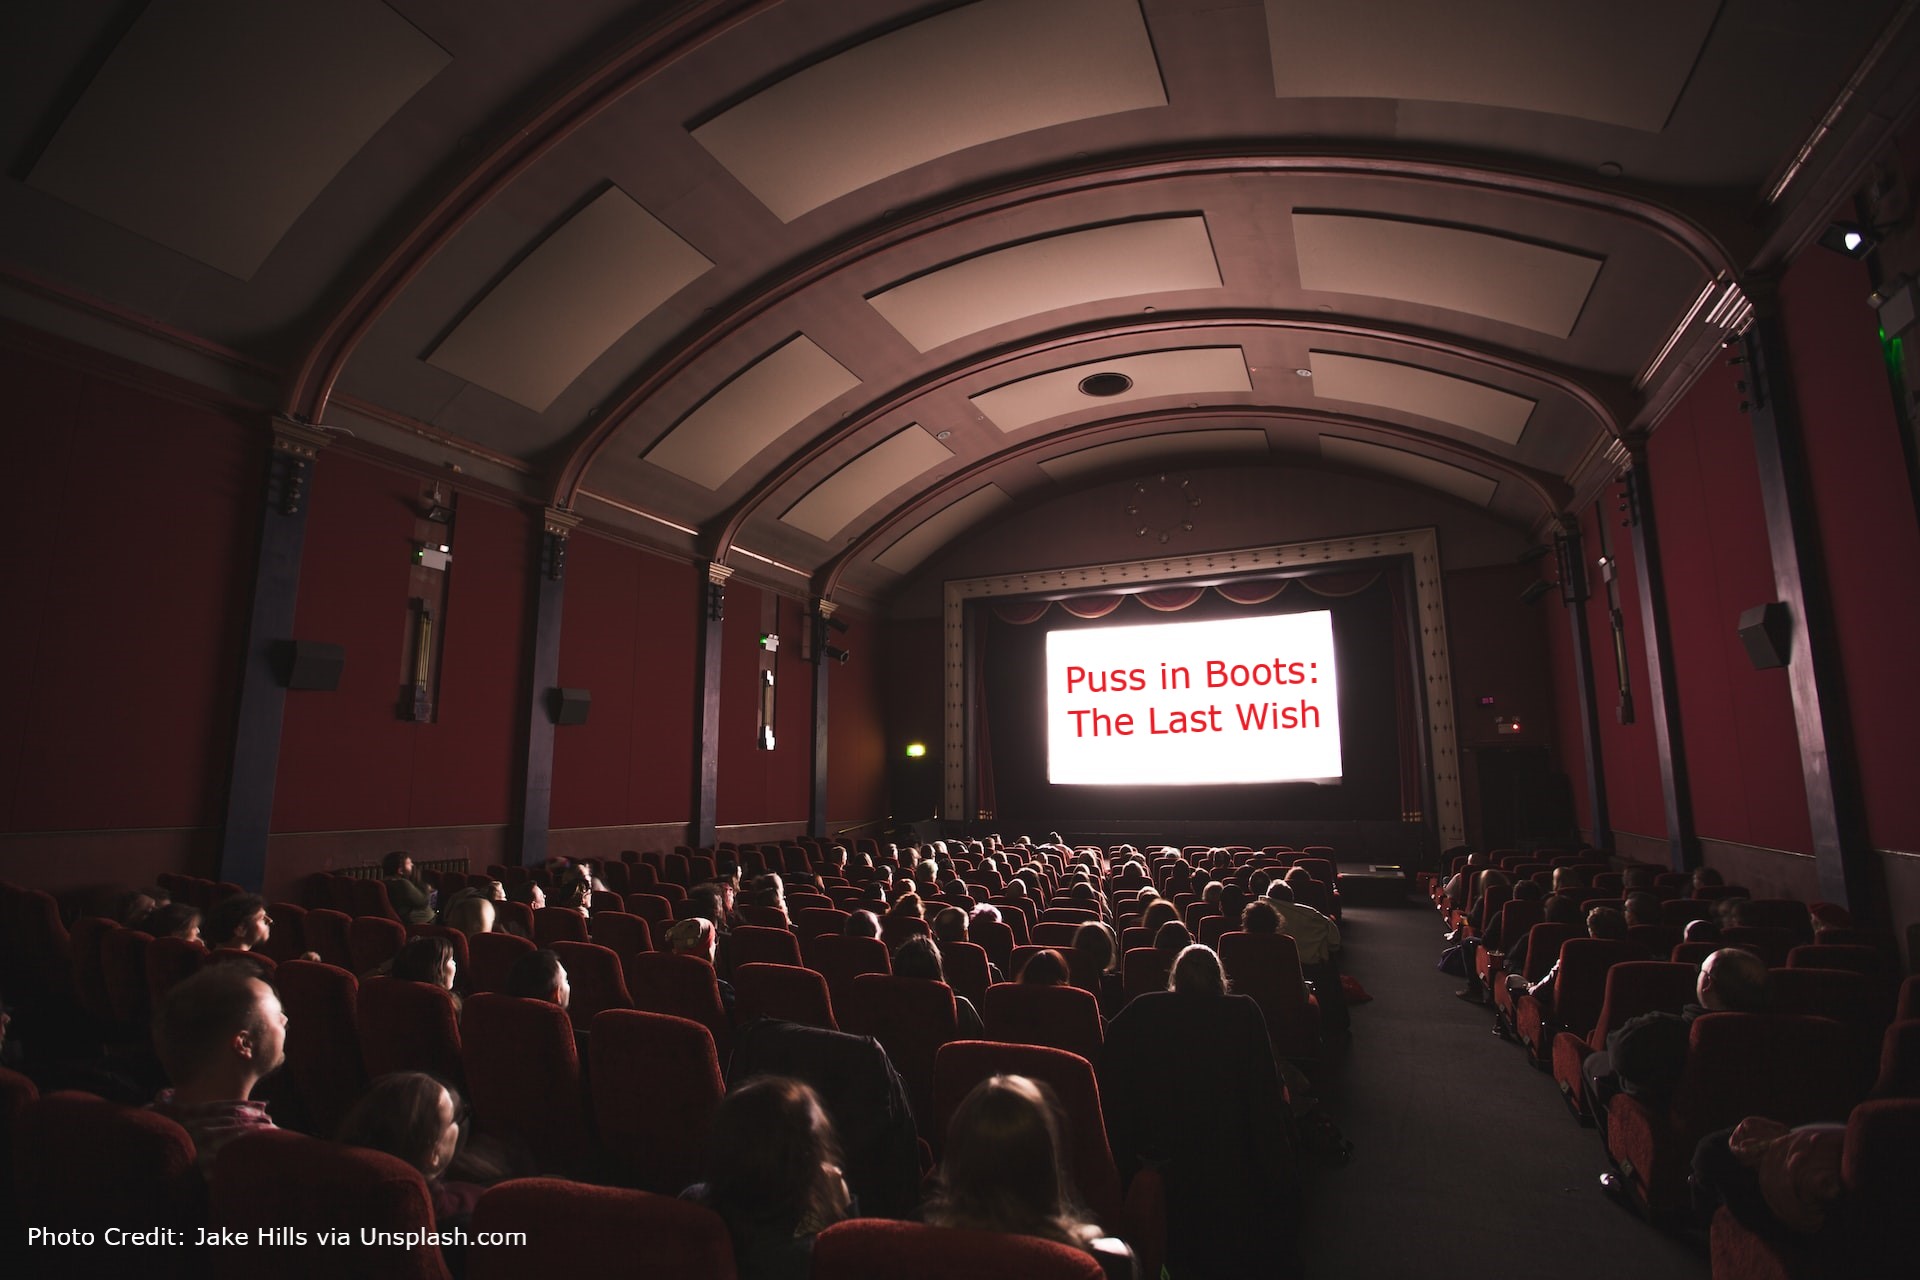 The photo shows a cinema with the words "Puss in Boots: The Last Wish" shown on the screen.